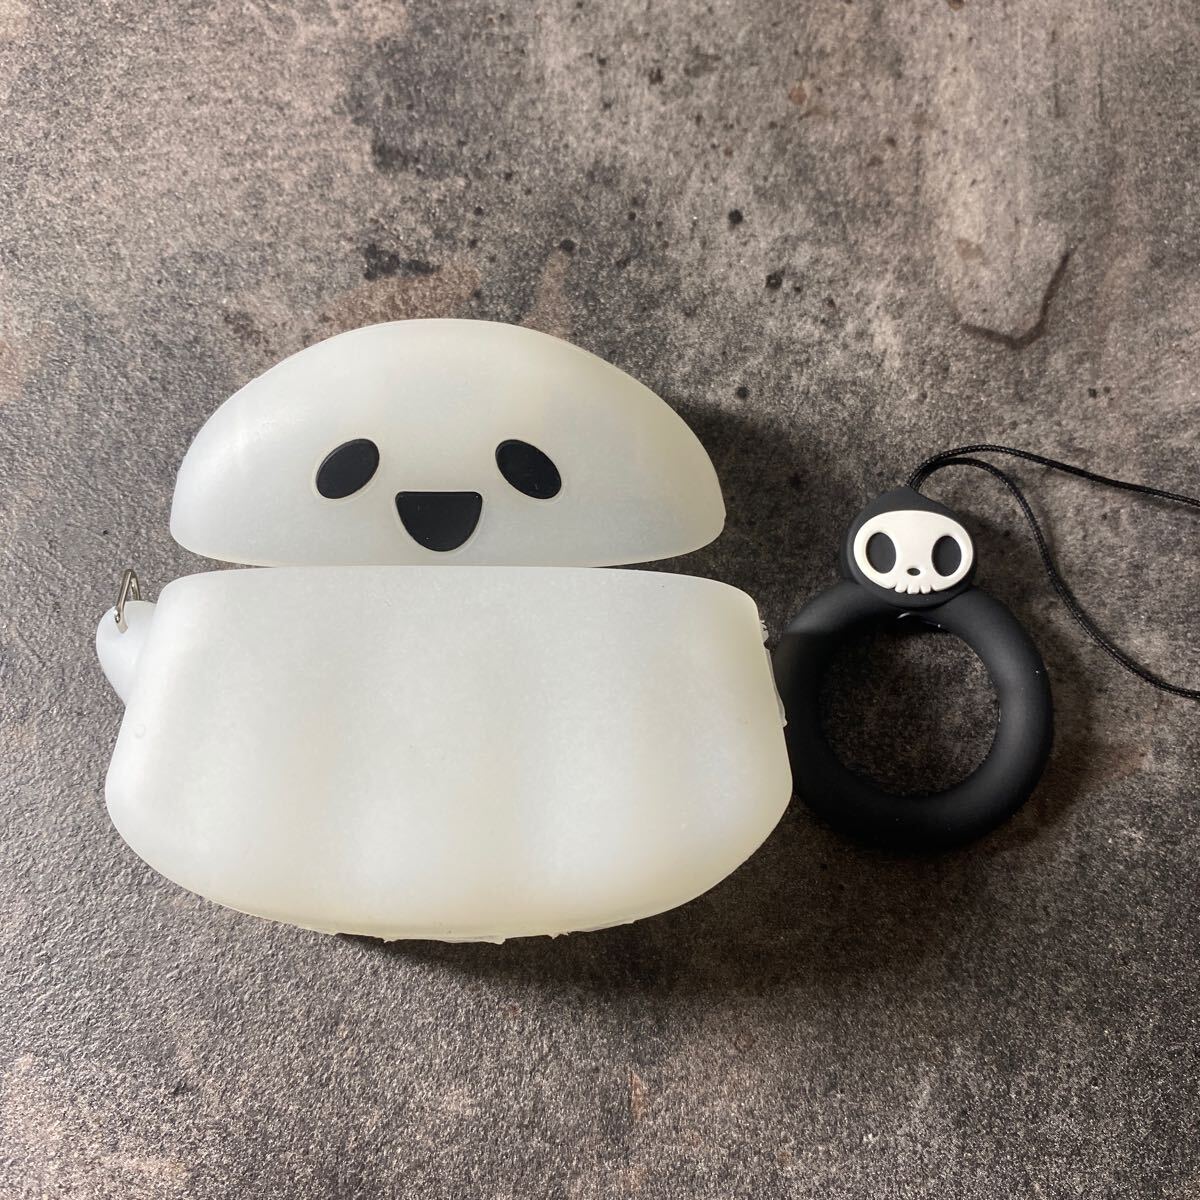 2316160☆ For Airpods pro 2 ケース Airpods pro 第2世代 2022 専用 カバー シリコン素材 エアーポッズ 保護ケース 着装まま充電可能_画像9